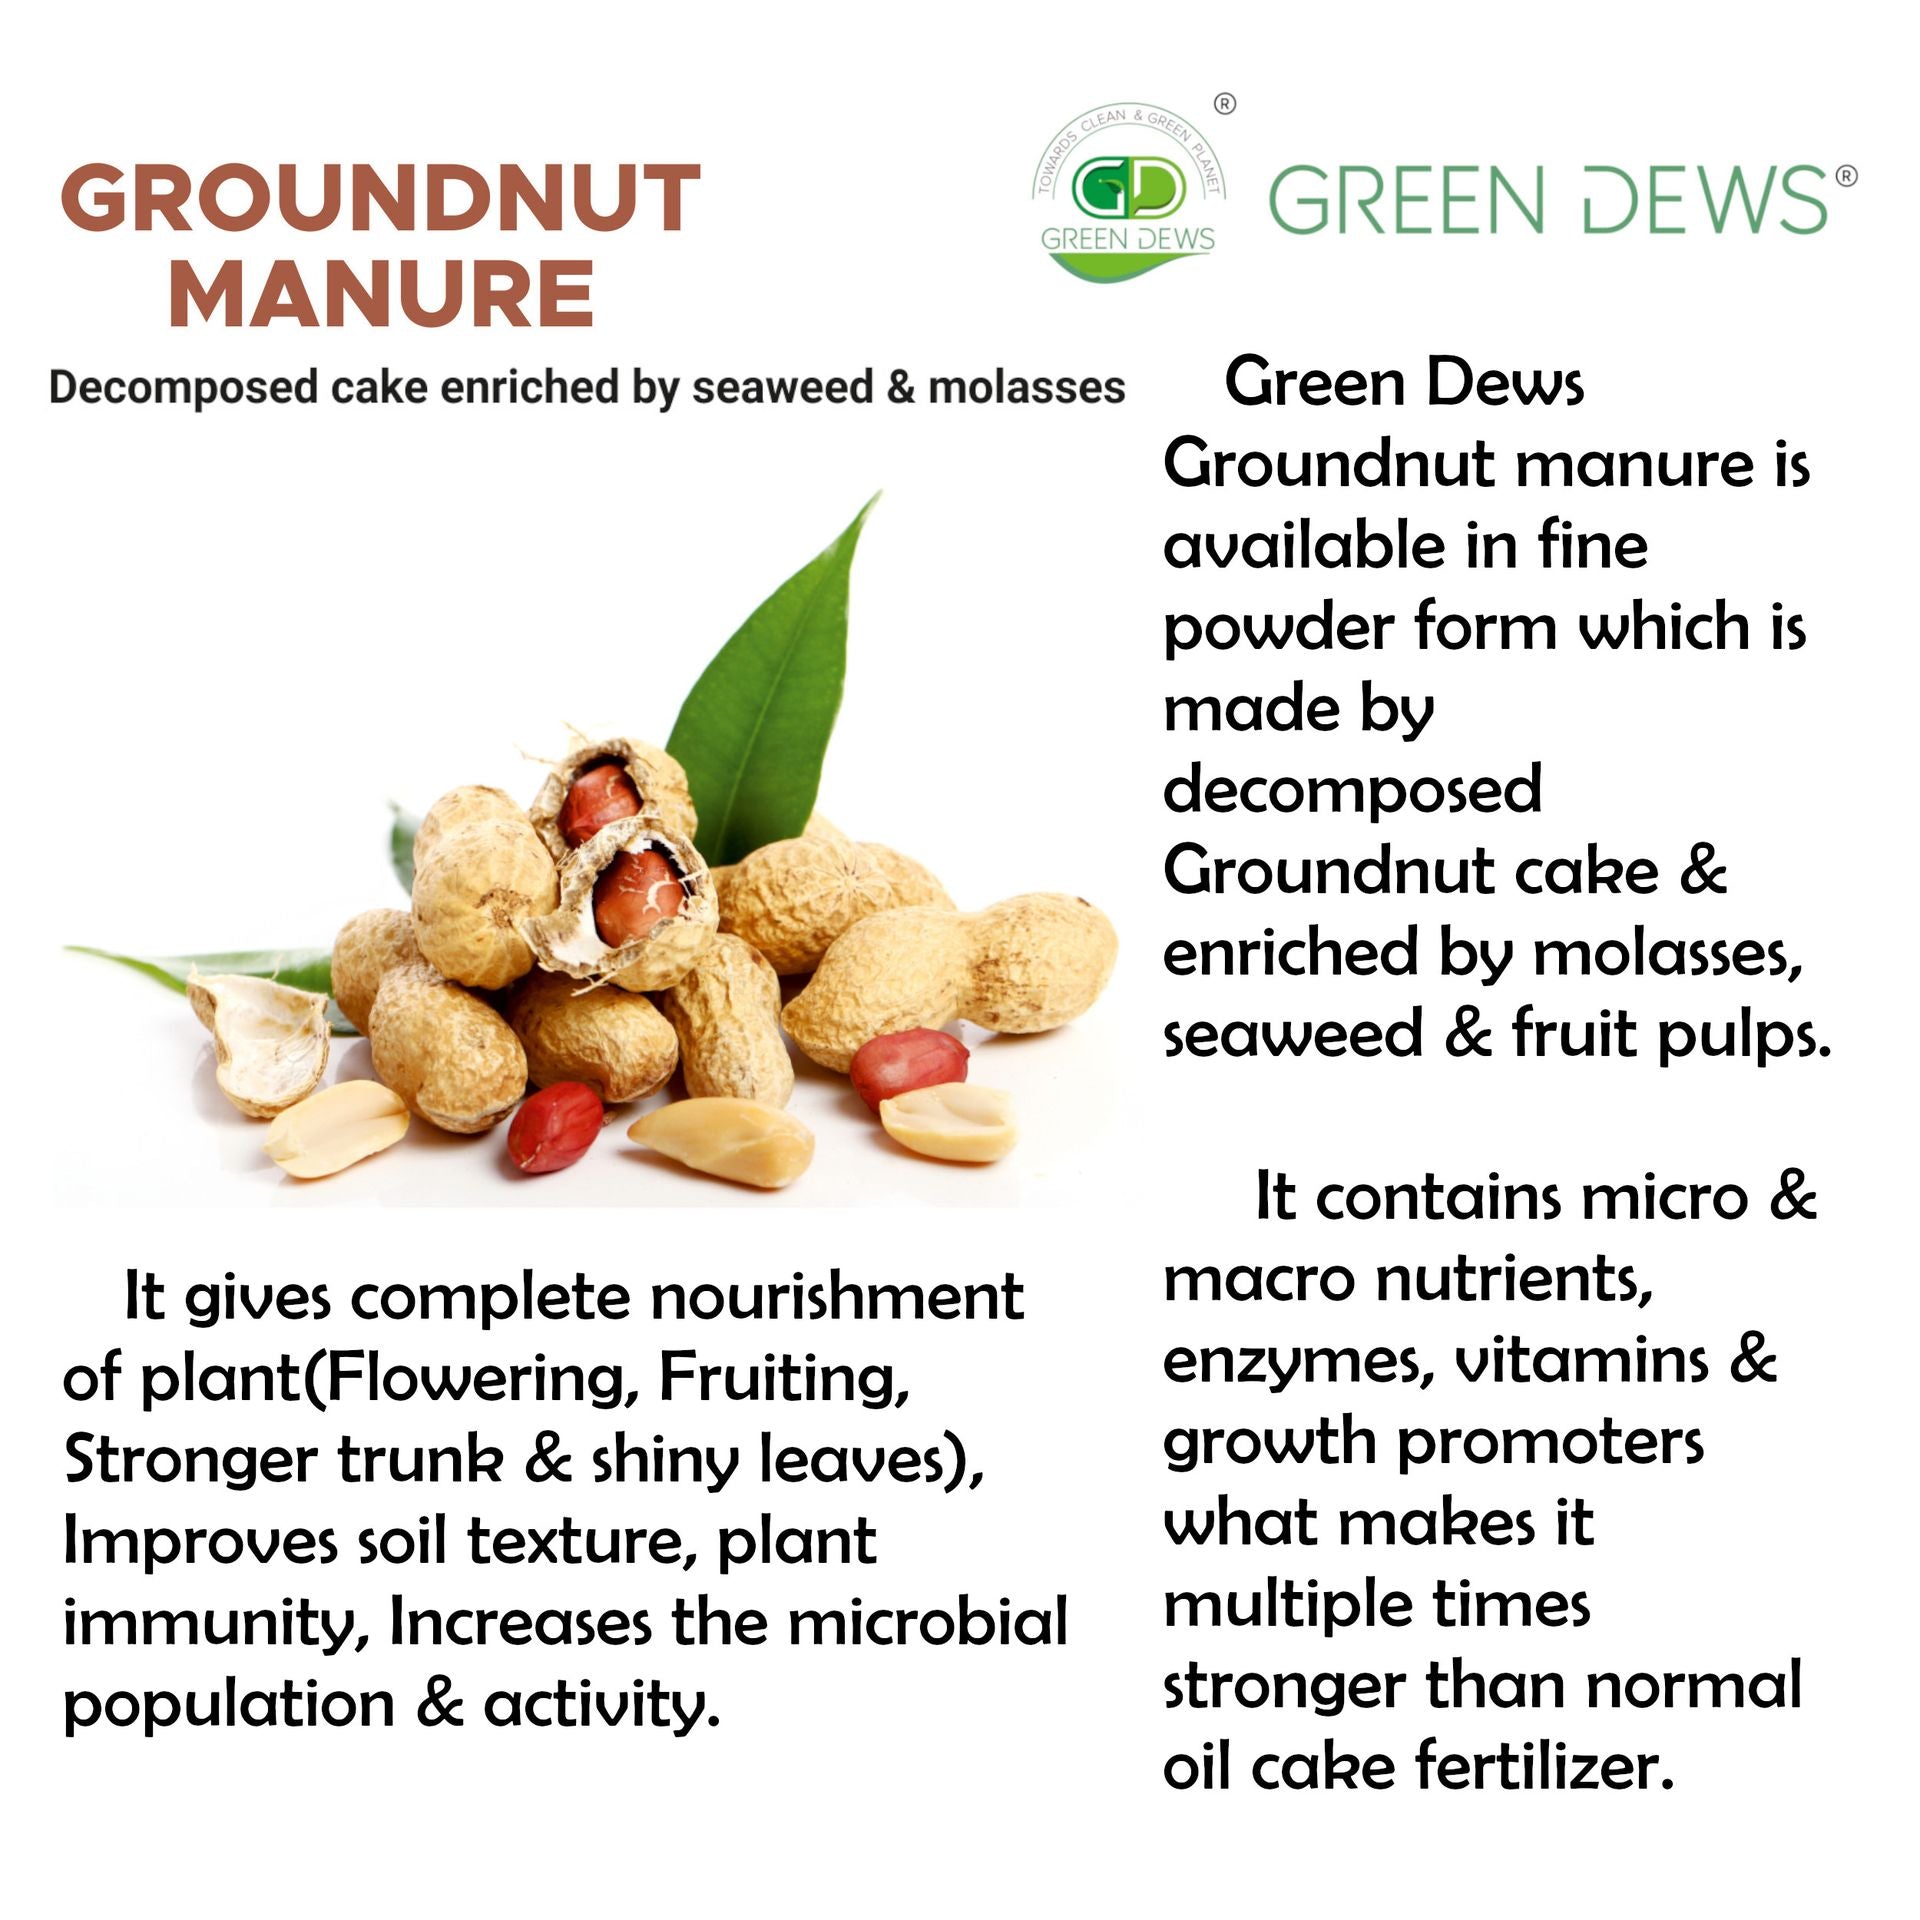 Green Dews Groundnut Oil Cake Powder Fertilizer For Plants Decomposed Ground Nut Manure Enriched By Seaweed Molasses - hfnl!fe